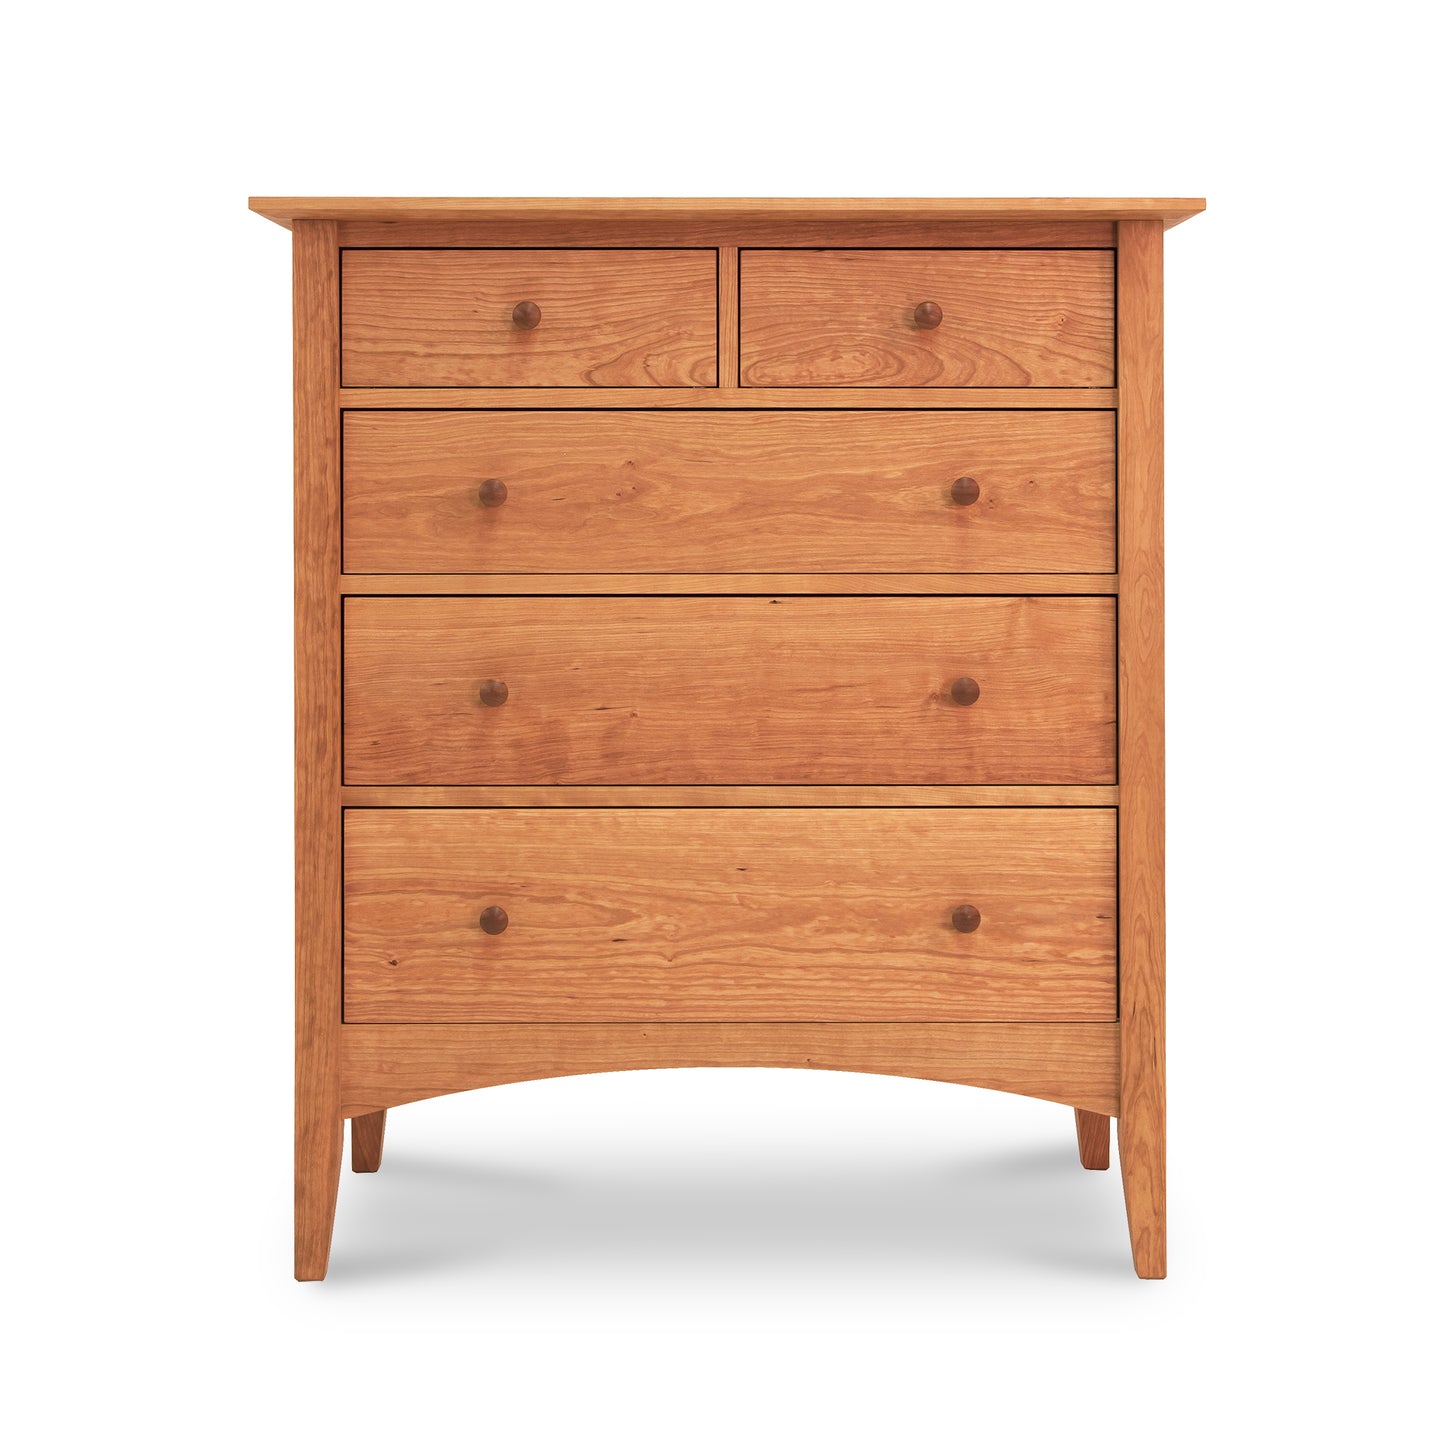 A American Shaker 5-Drawer Chest from Maple Corner Woodworks, crafted from natural solid wood, featuring five pull-out compartments, standing against a white background.